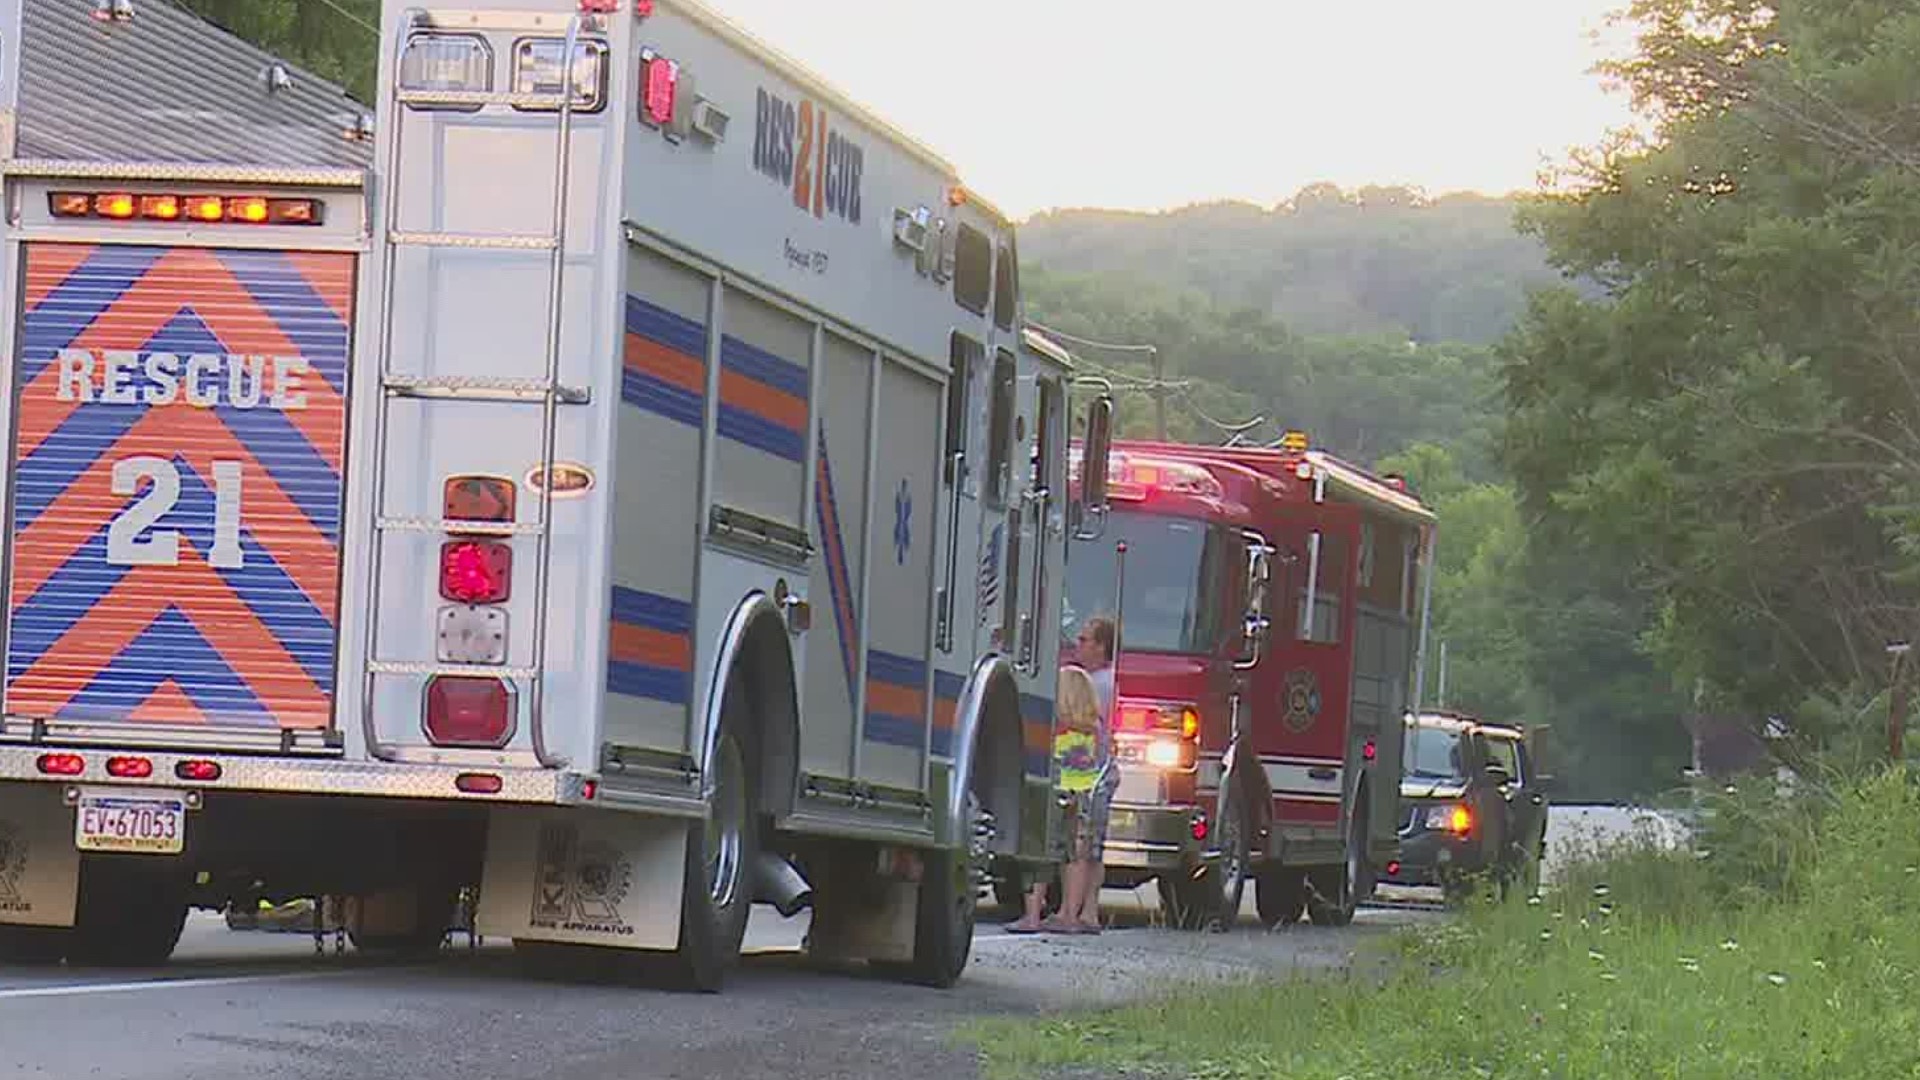 The Lackawanna County coroner has identified the man and woman who died at the hospital after Sunday night's ATV crash near Archbald.